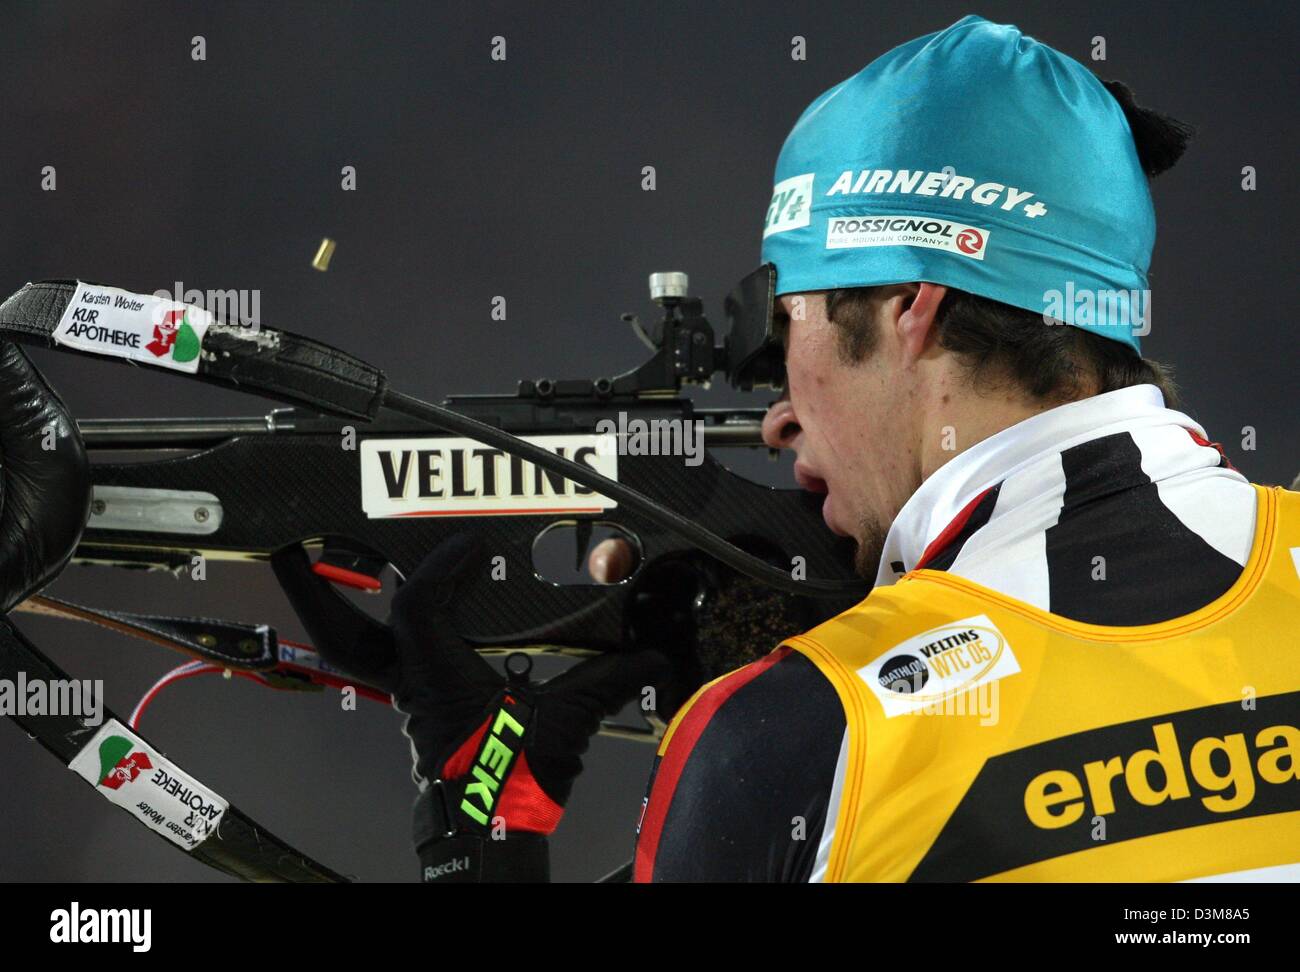 (dpa) - German biathlete newcomer Christoph Knie amis with his rifle during the Biathlon World Team Challenge at the Veltins-Arena in Gelsenkirchen, Germany, Friday, 30 December 2005. Around 2,500 cubic metres of artificial snow were delivered on 120 trucks from the indoor ski venue in Neuss, Germany, to the Veltins-Arena to build a 1,000 metre long cross-country ski run for the co Stock Photo